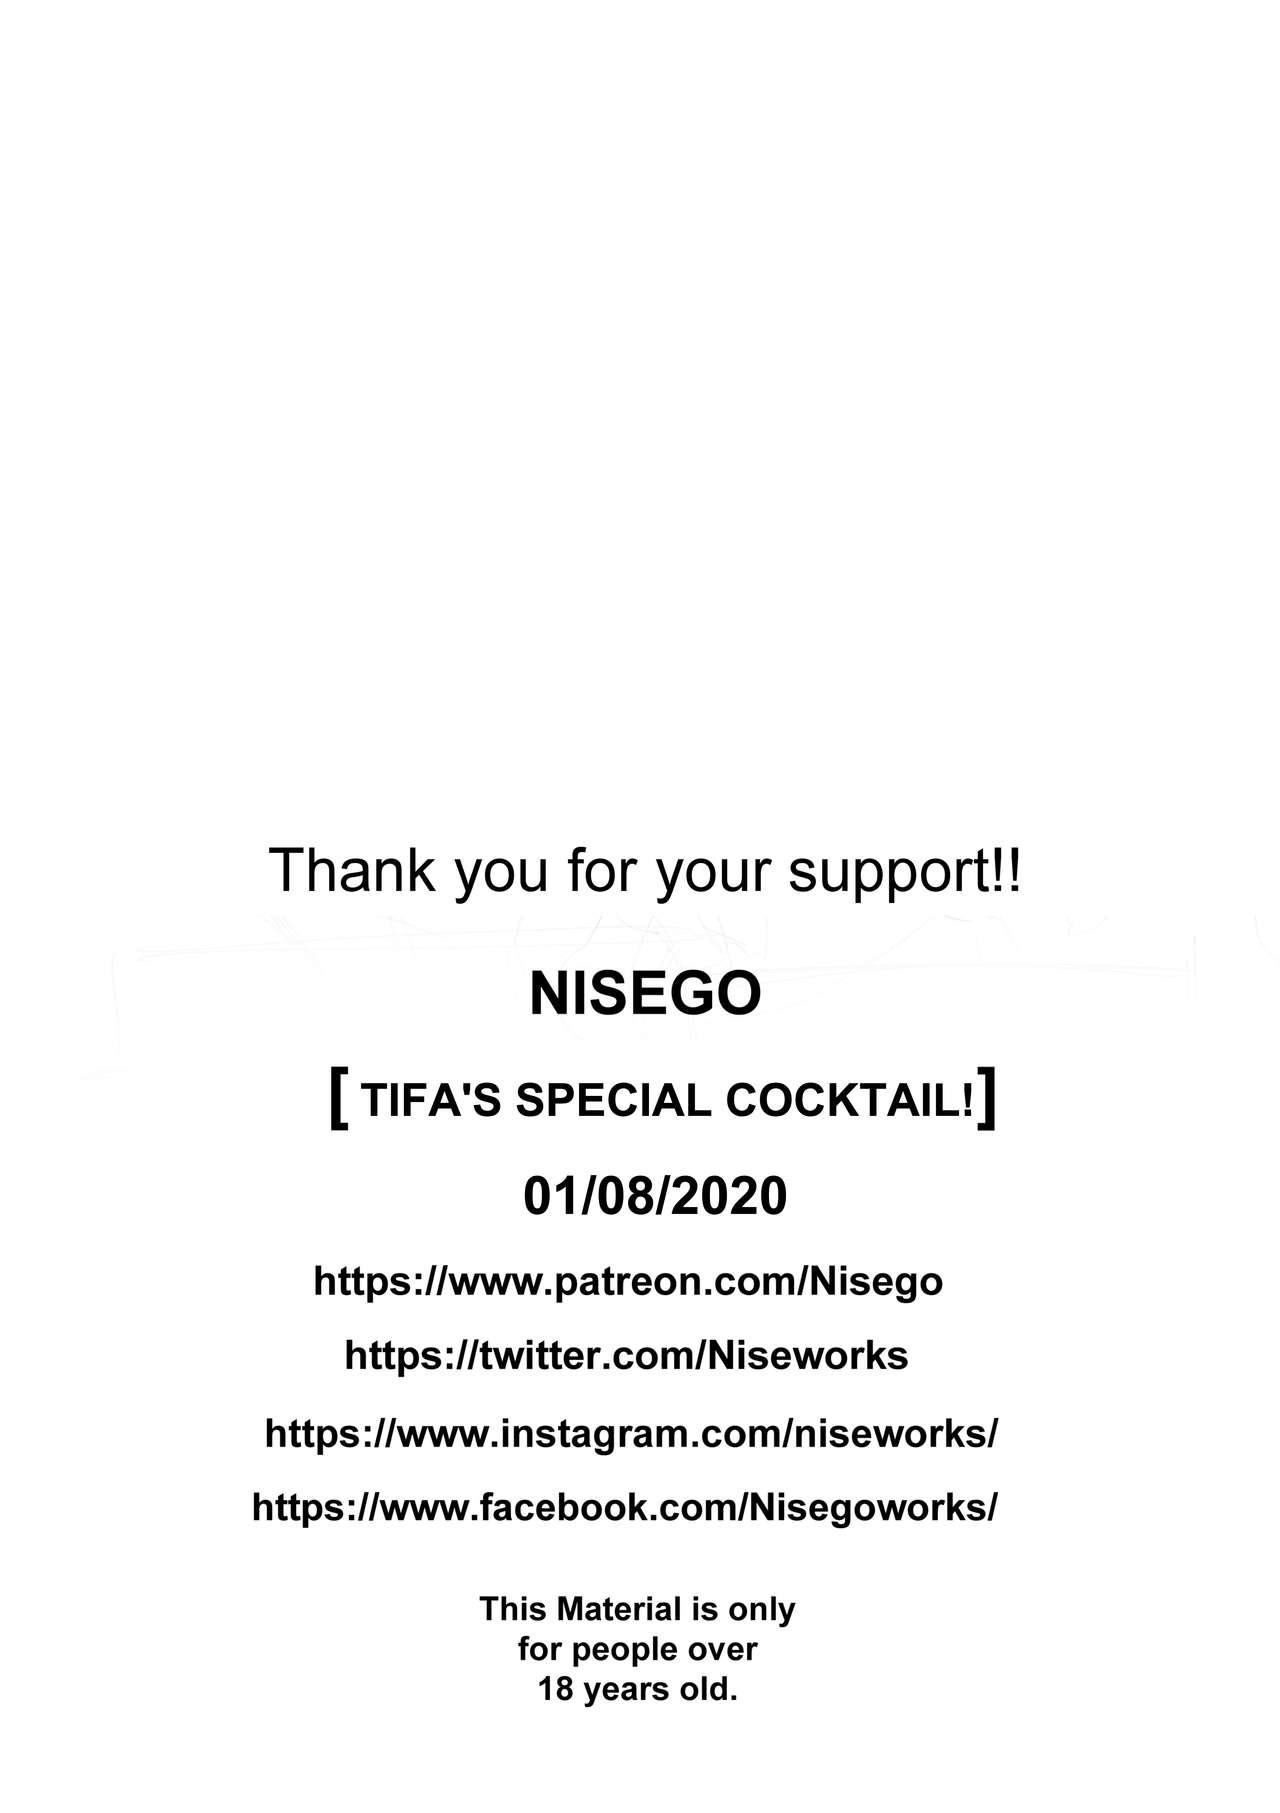 [Nisego] Tifa’s special Cocktail! - 18